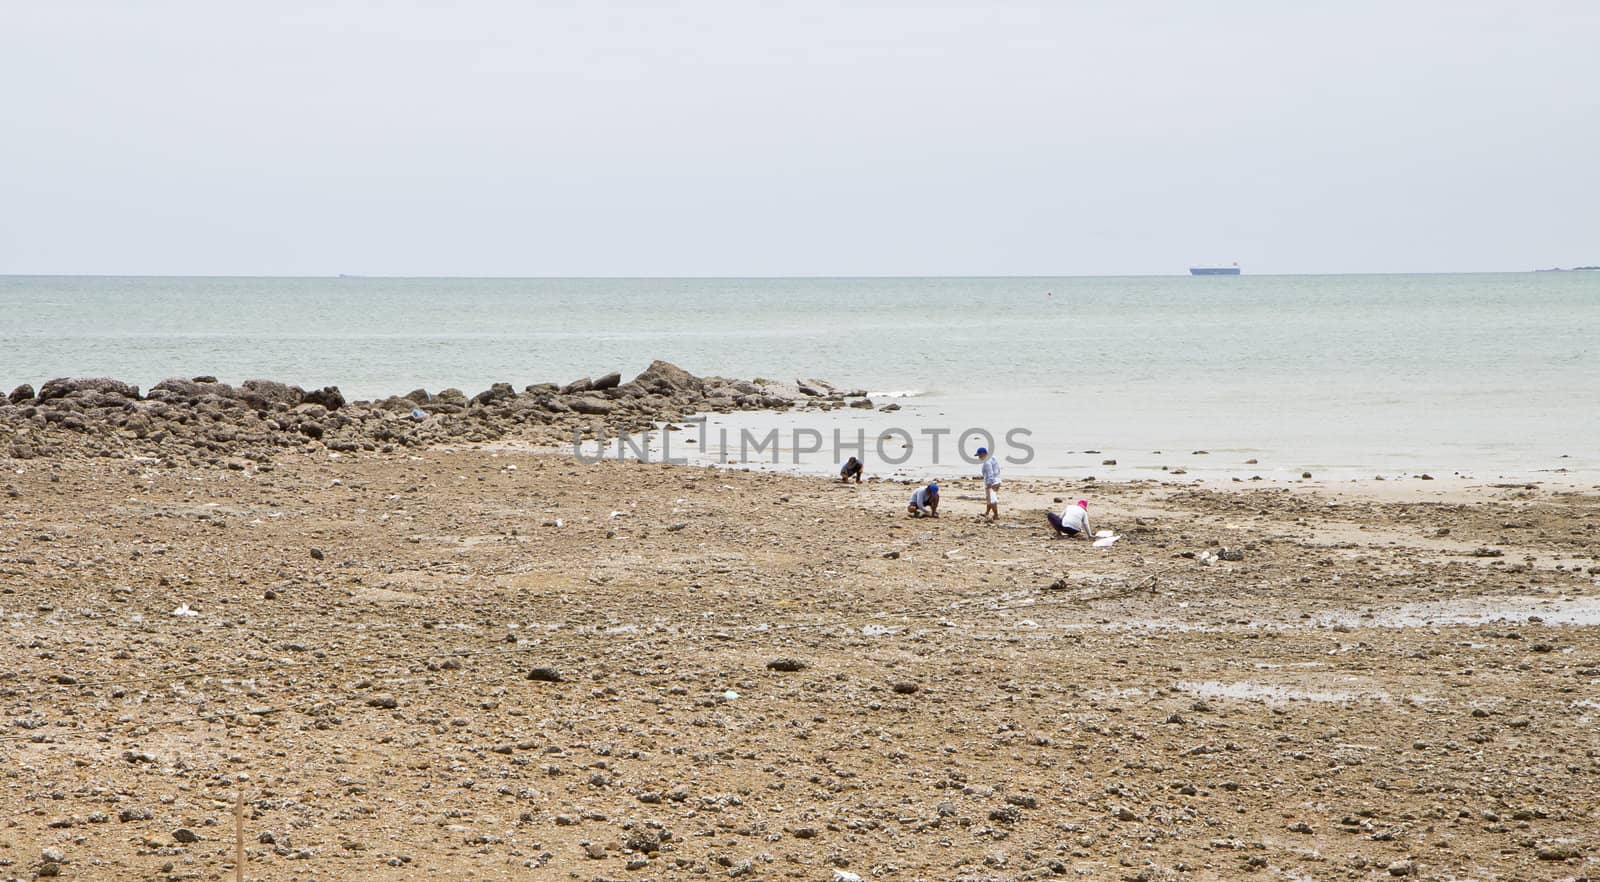 Beaches, rocky areas. The sea east of Thailand.